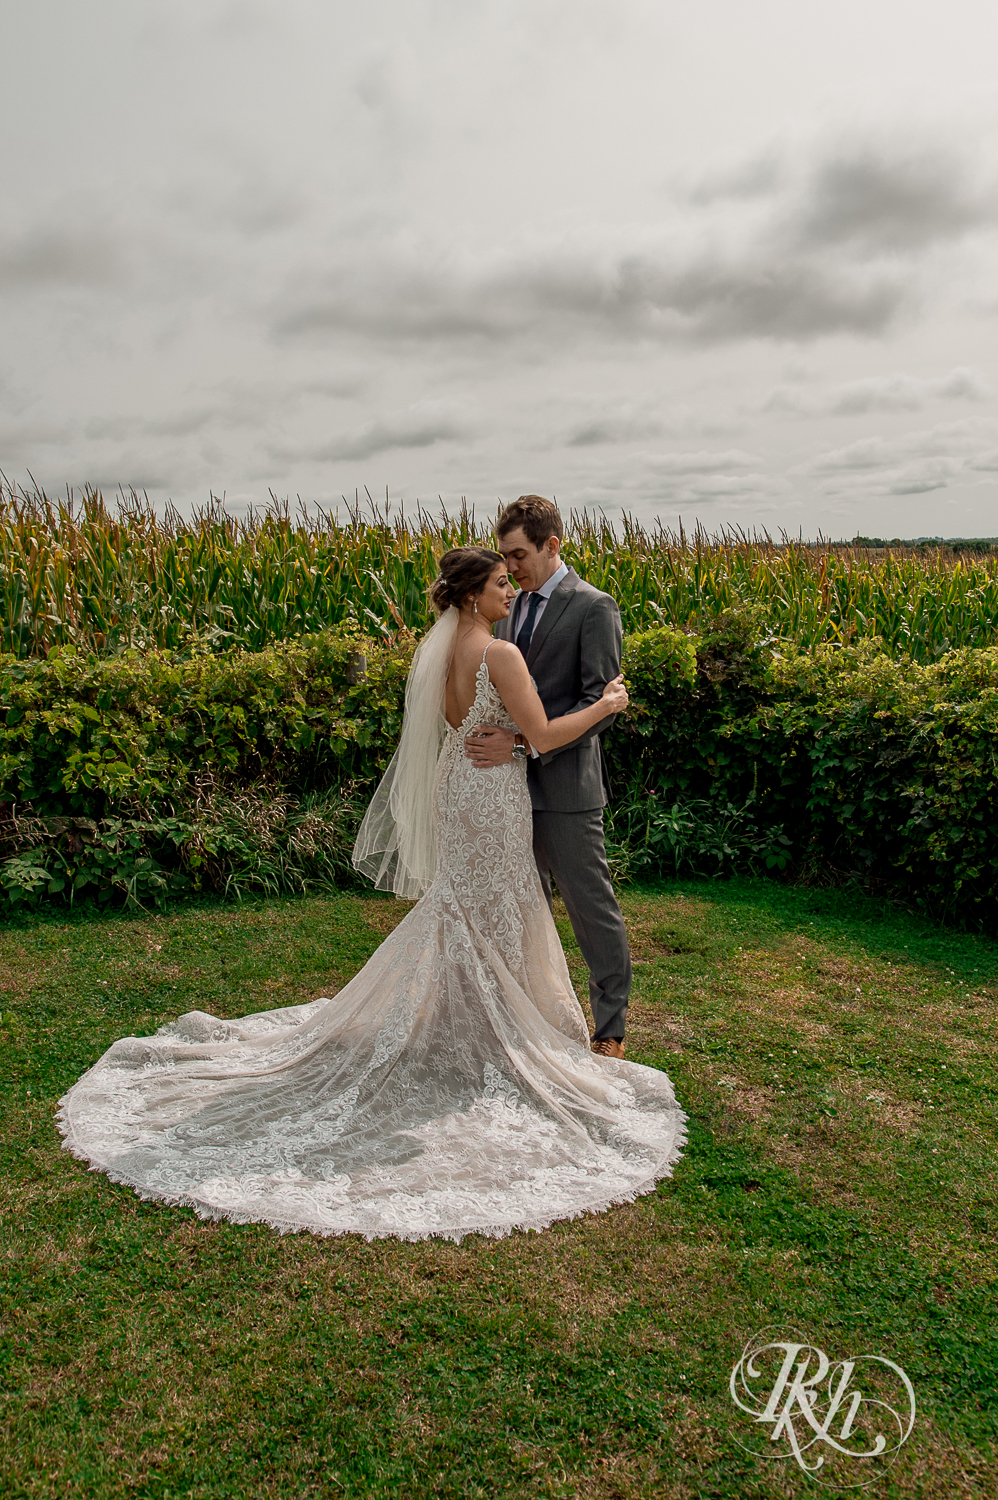 Bride and groom kiss in front of cornfield at Legacy Hills Farm in Welch, Minnesota.